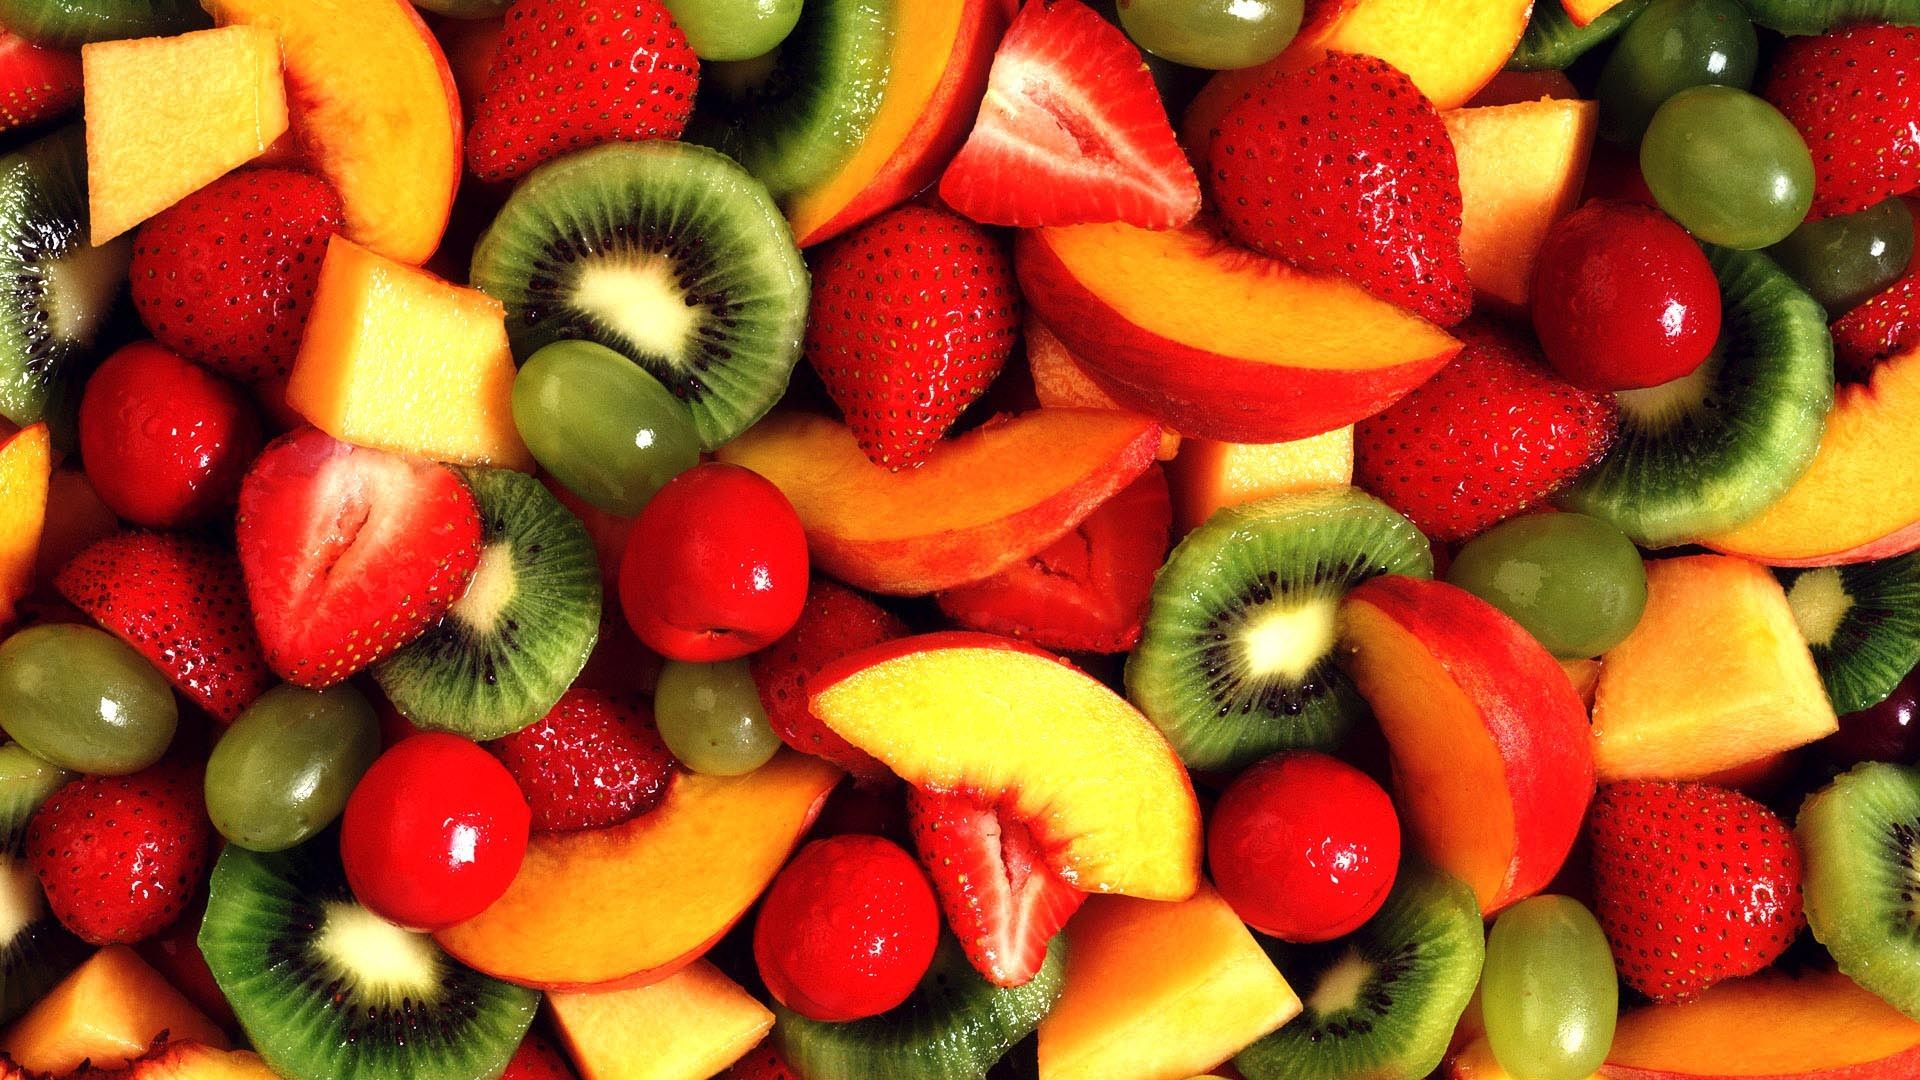 fruits images free download